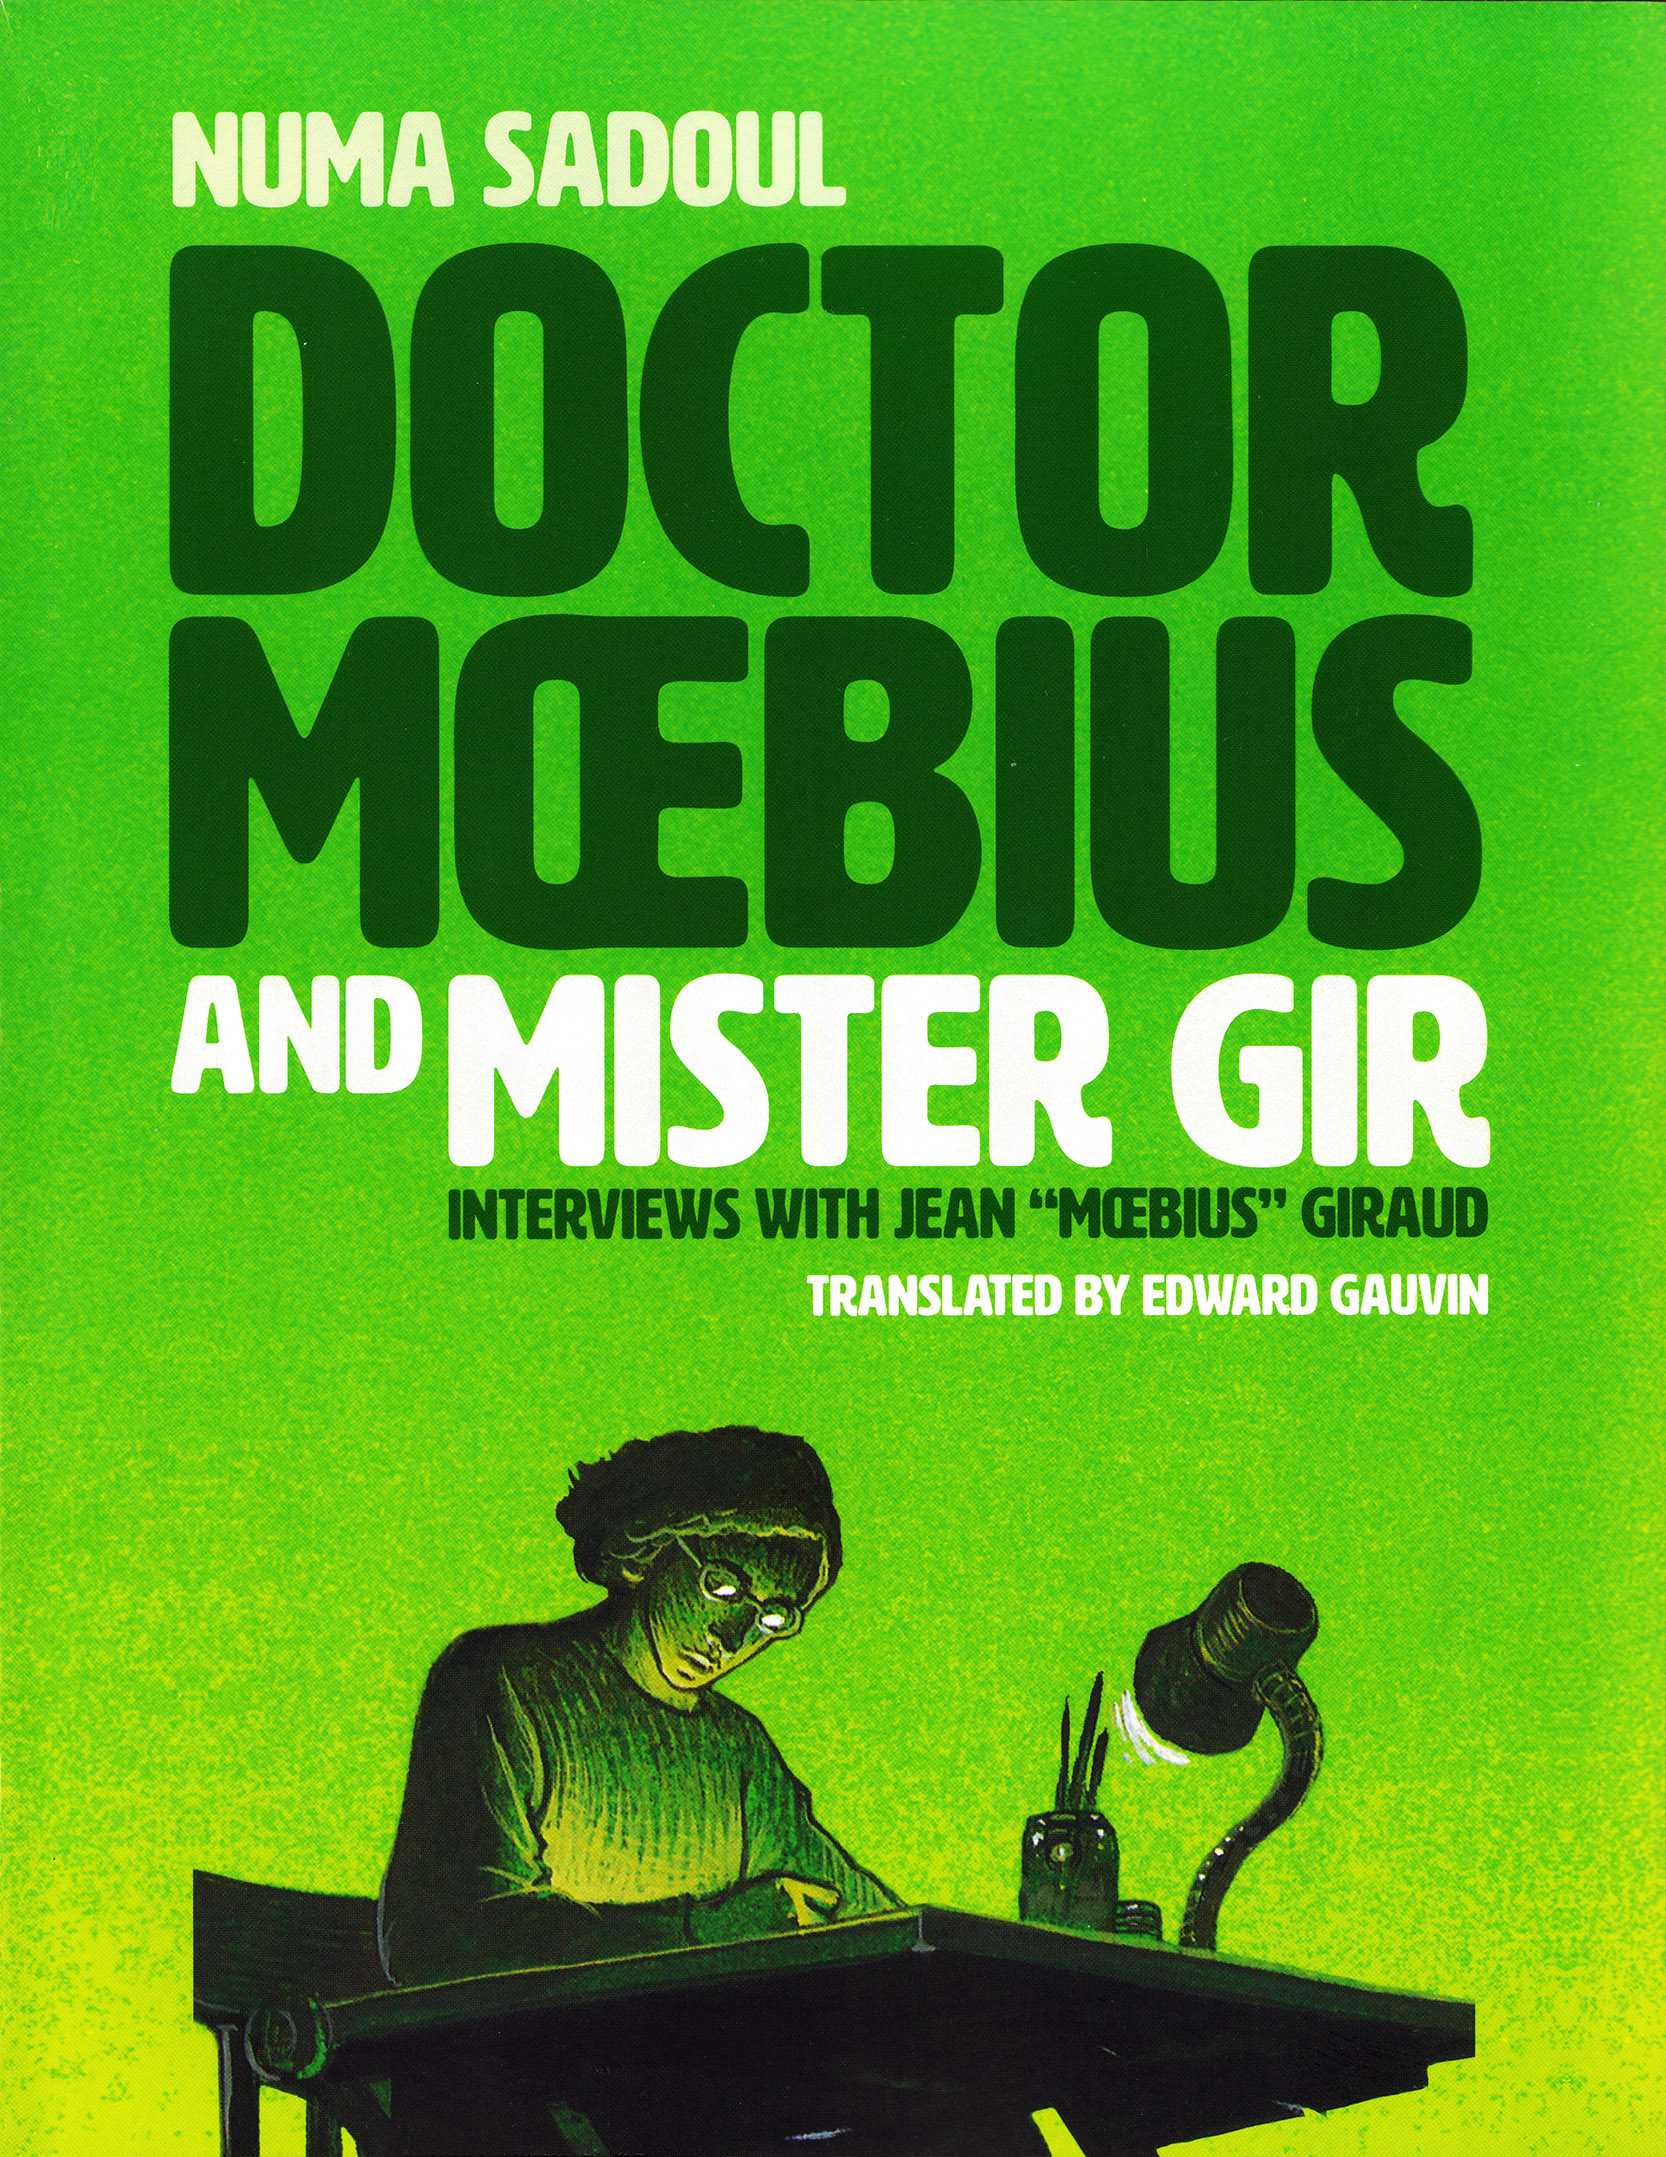 Read online Doctor Moebius and Mister Gir comic -  Issue # TPB (Part 1) - 1